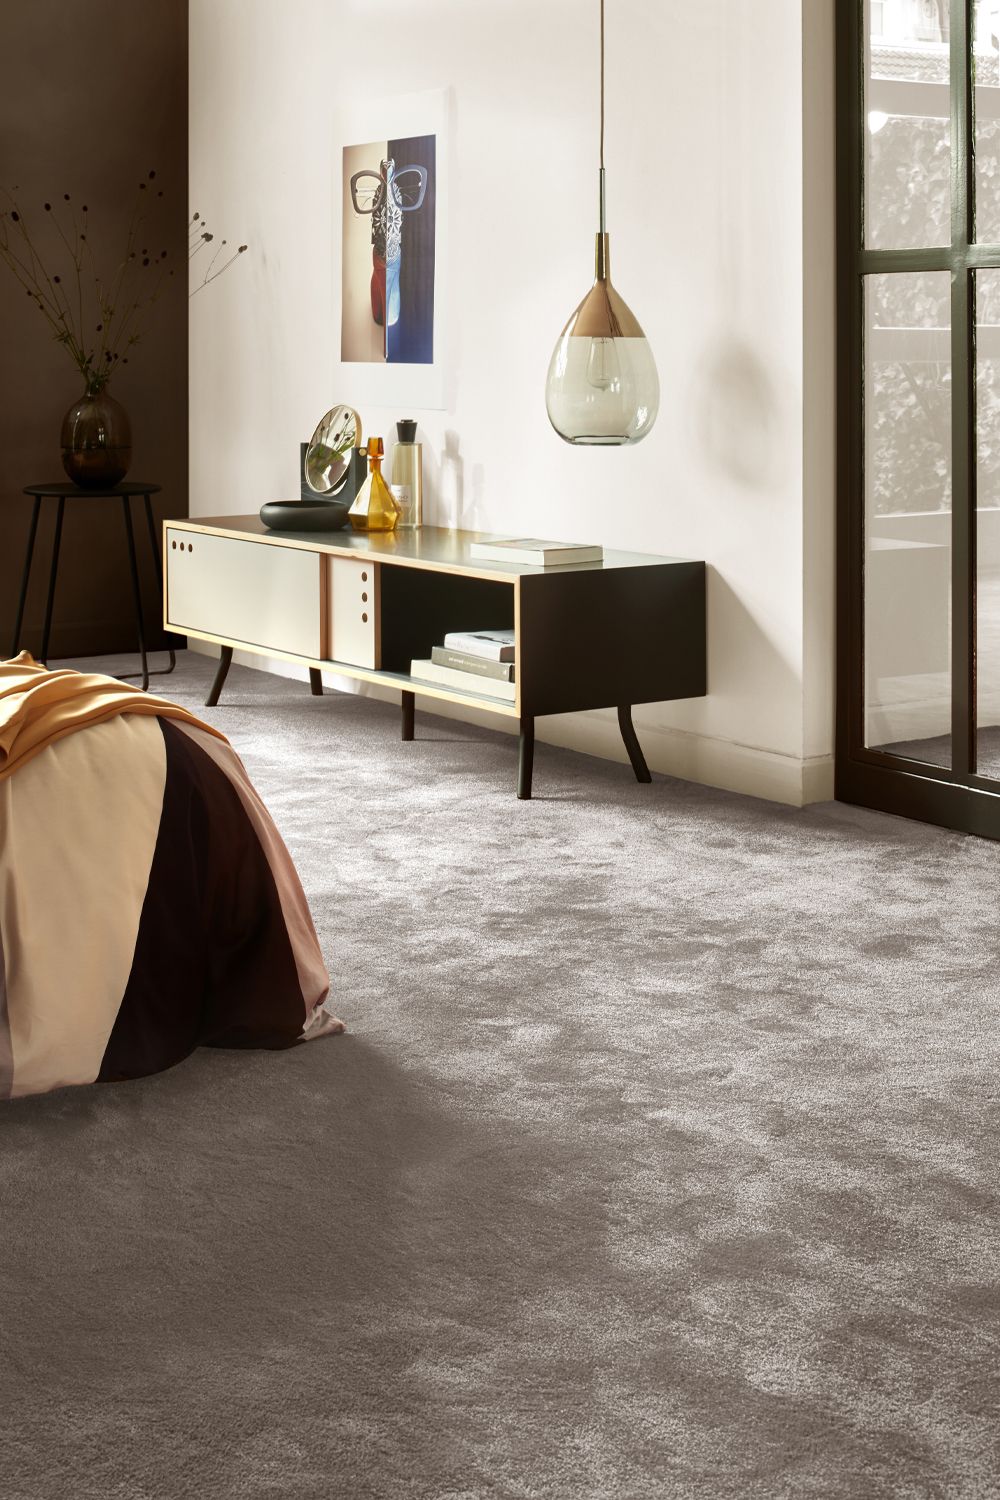 Bedroom Carpets: Stunning And Useful   